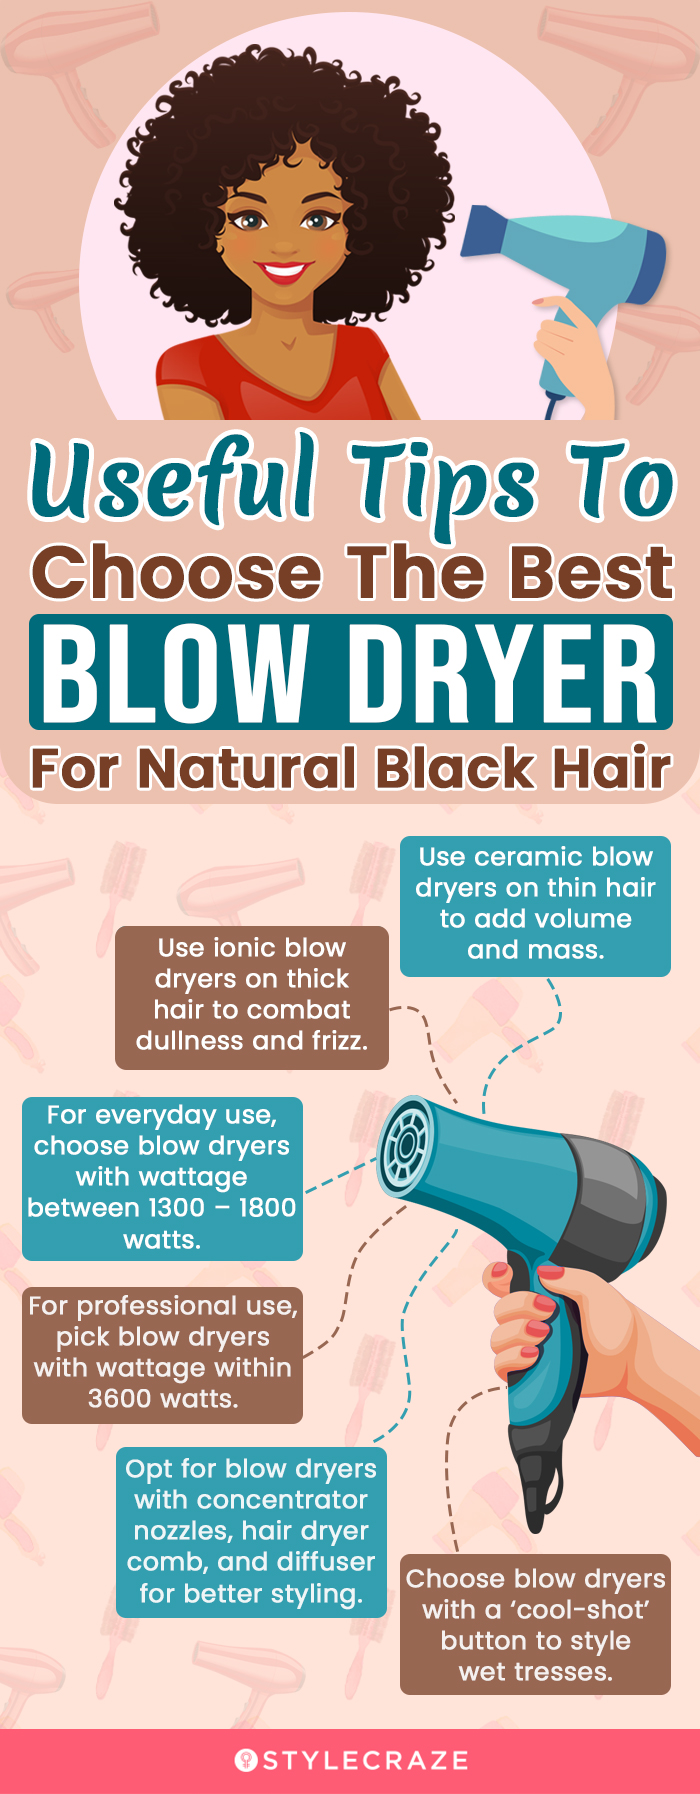 Useful Tips To Choose The Best Blower Dryer For Natural Black Hair (infographic)